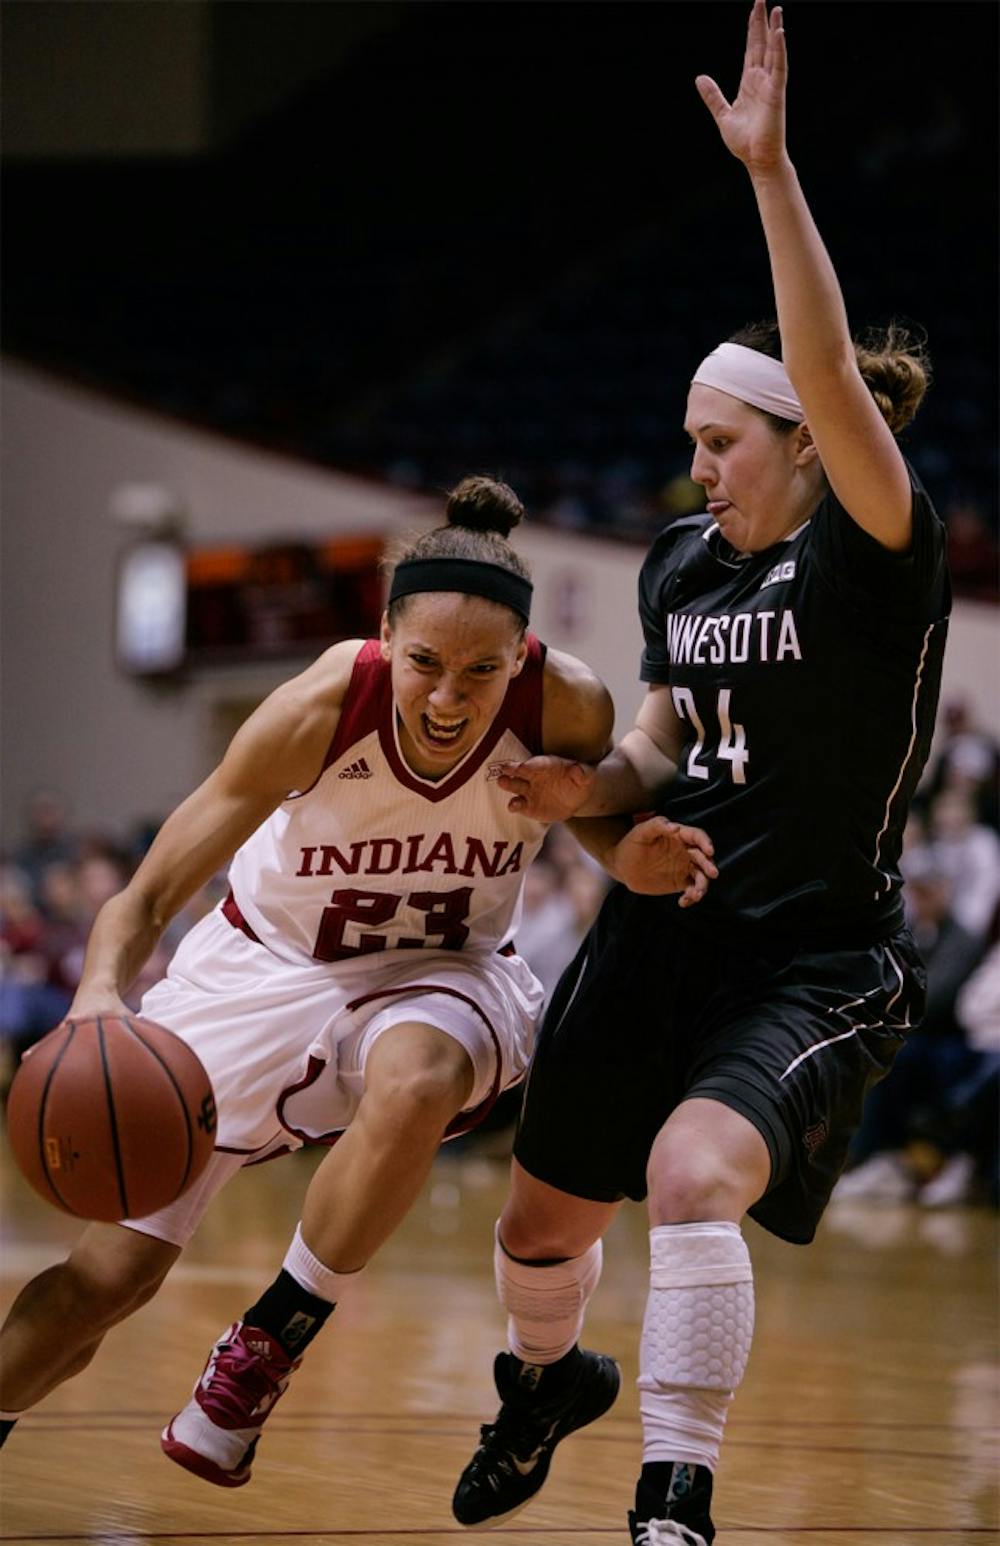 Junior guard Alexis Gassion dribbles the ball up the court against a Minnesota defender Feb. 18 at Assembly Hall.